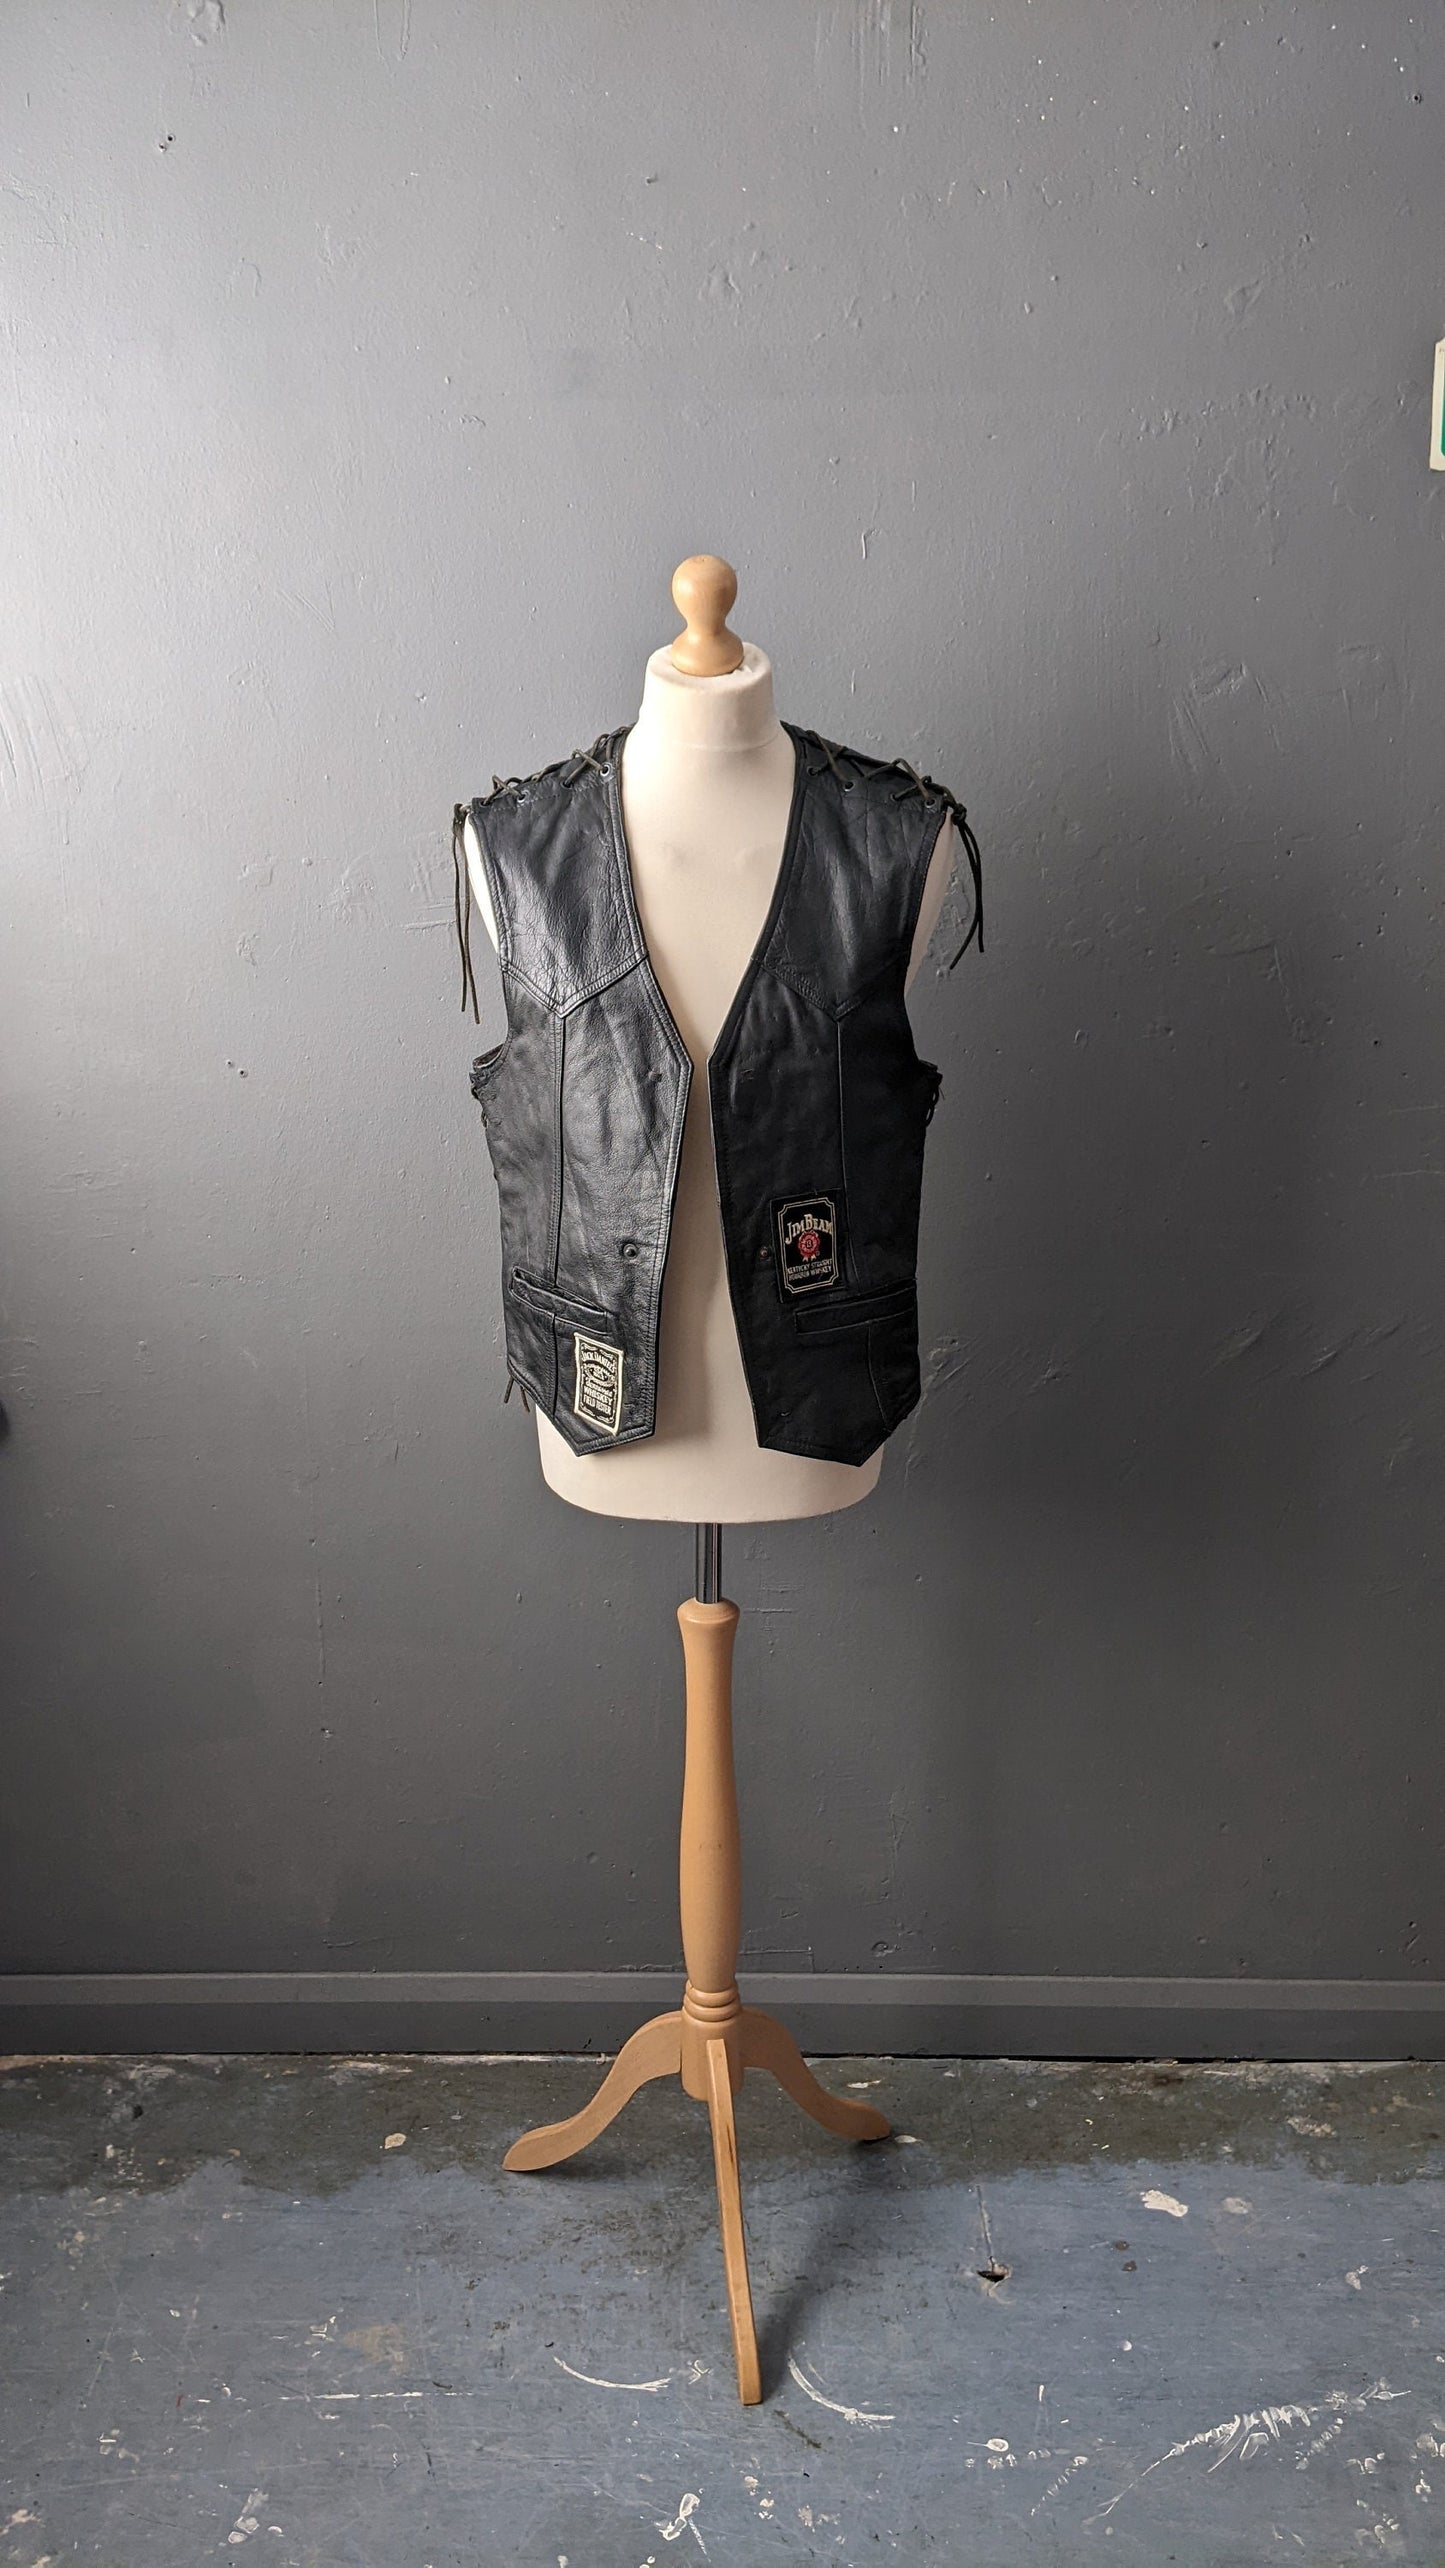 80s Mens Biker Leather Waistcoat, John F Gee Motorcycle Laced Vest, 40 Chest Size Medium